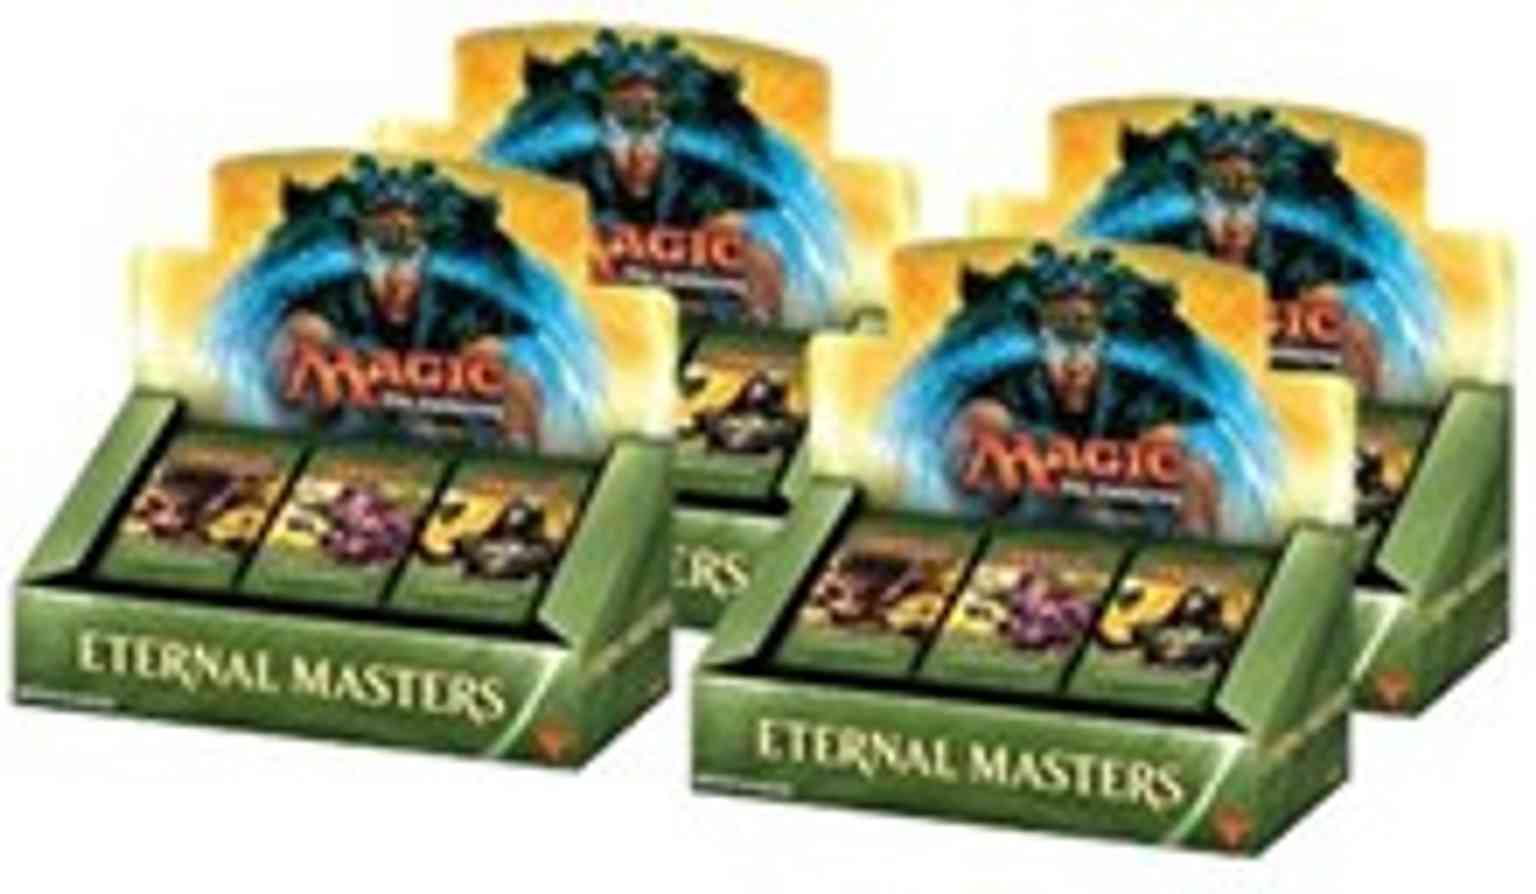 Eternal Masters Booster Box Case magic card front